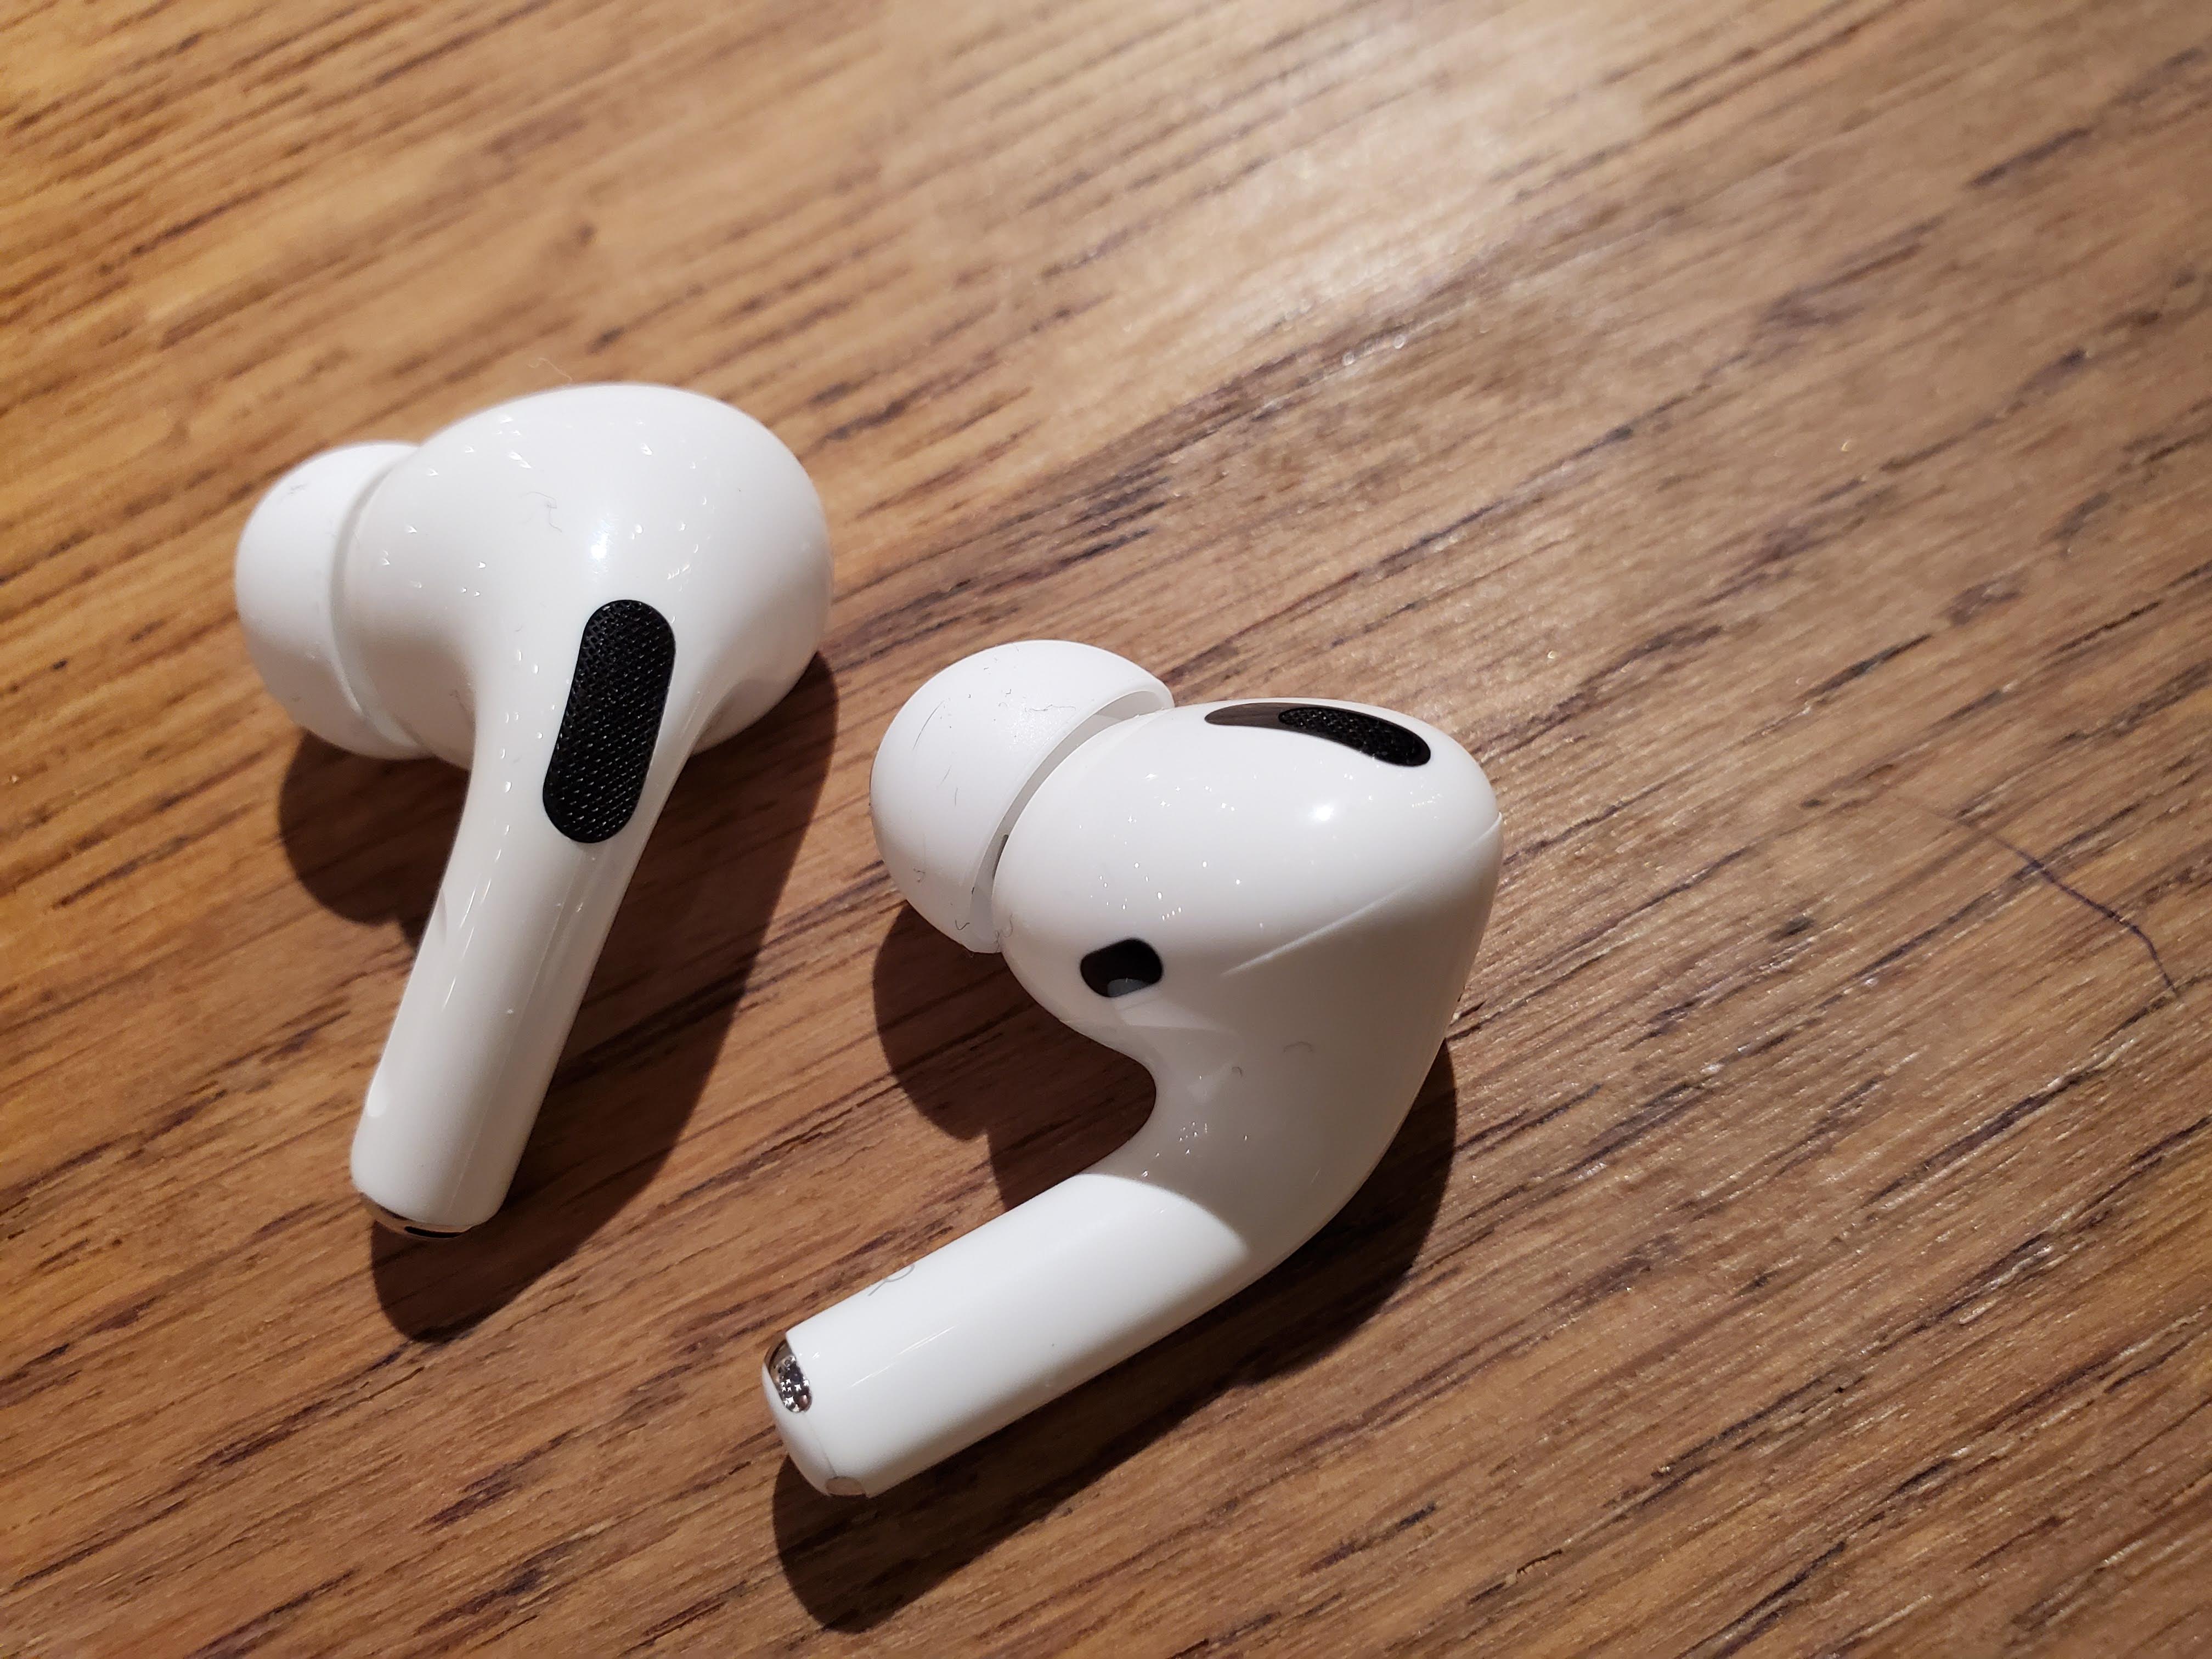 AirPods Proの中古品や新品未使用品のおトクな購入方法を解説 | ACTIVATE